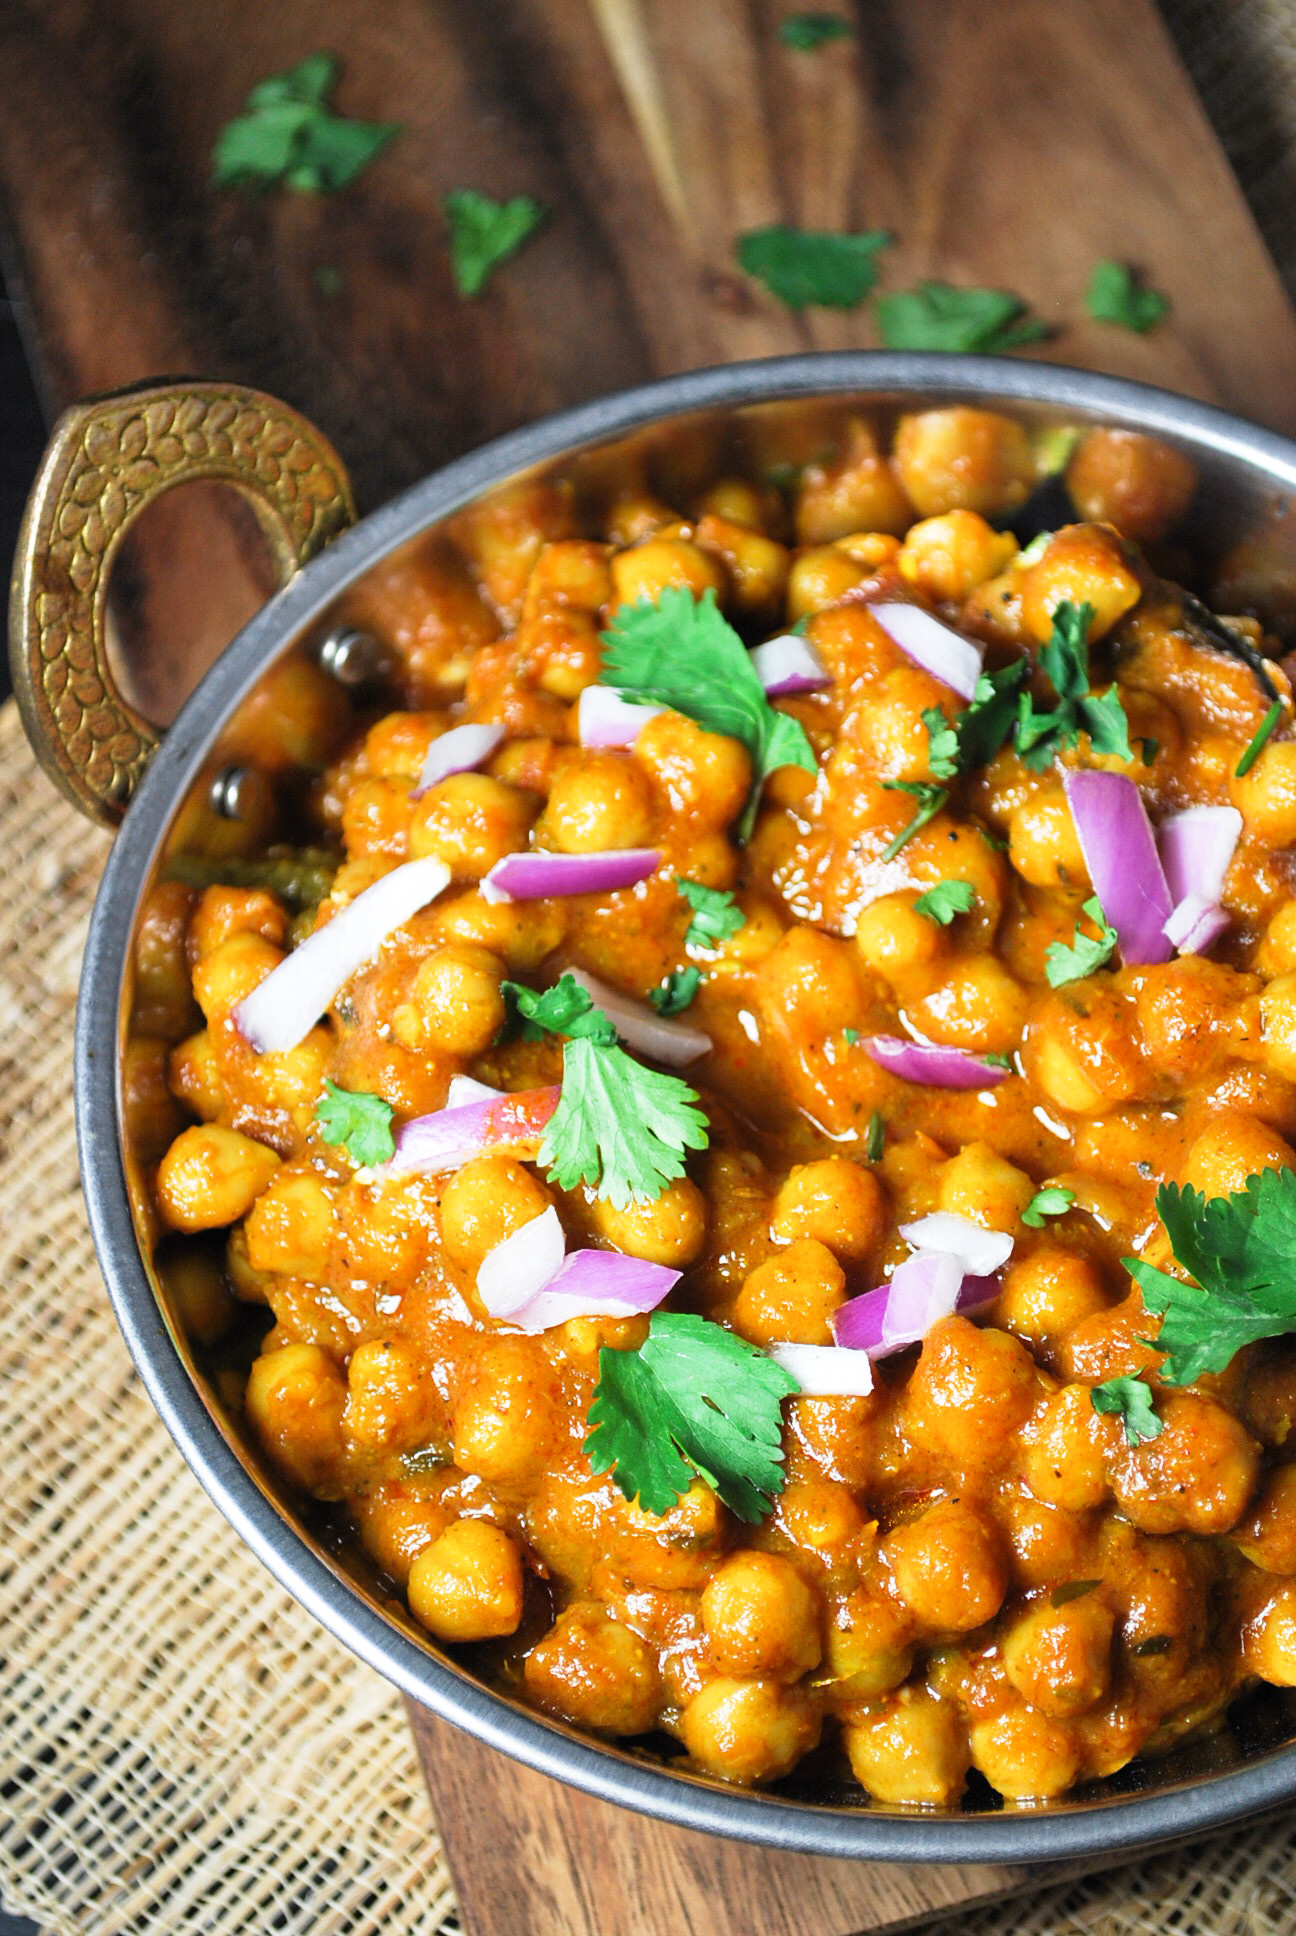 30 Of the Best Ideas for Chickpea Indian Recipes - Home, Family, Style ...